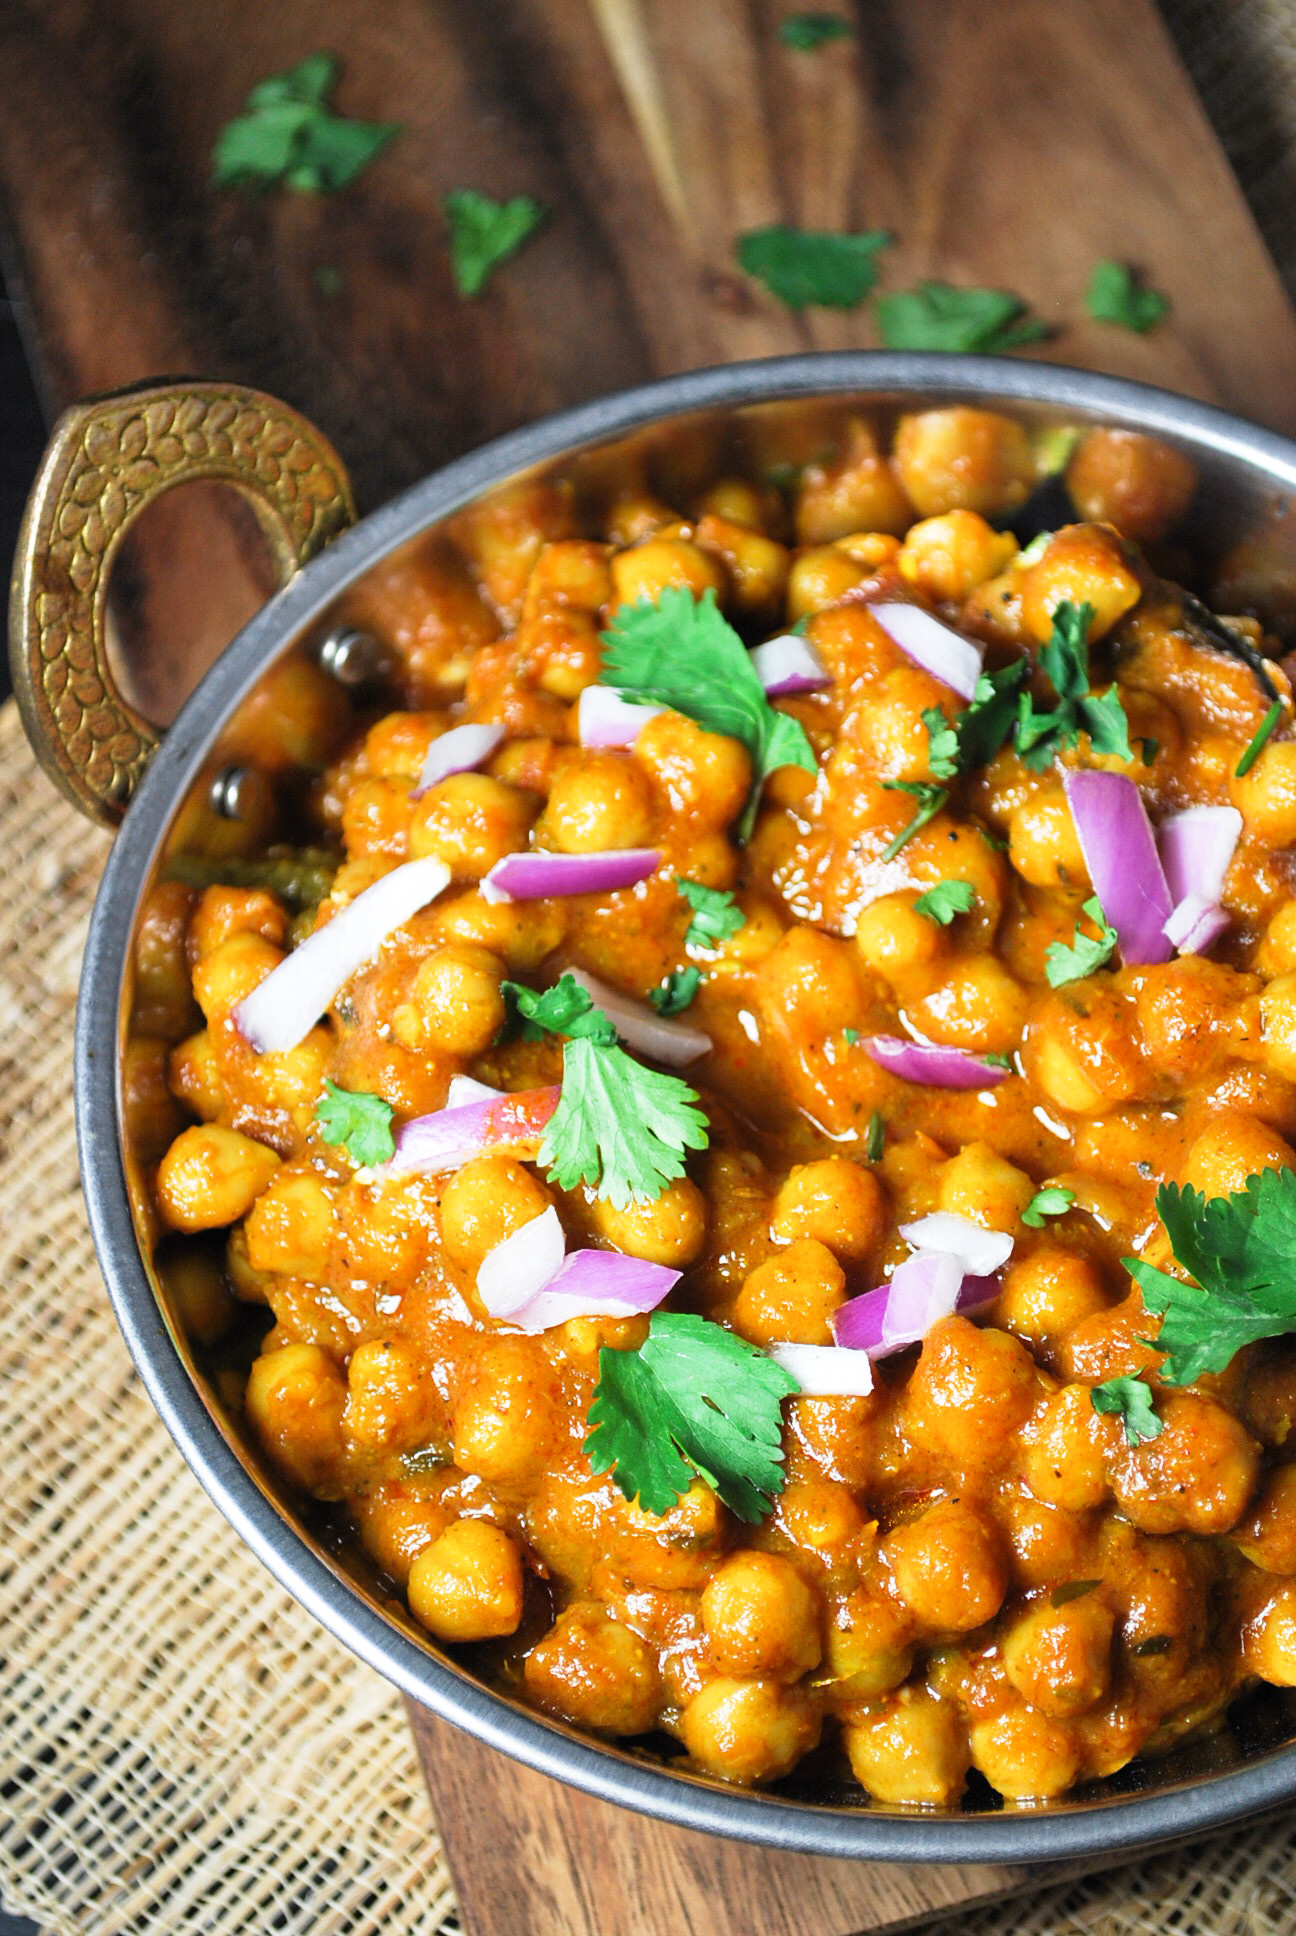 30 Of the Best Ideas for Chickpea Indian Recipes - Home, Family, Style ...